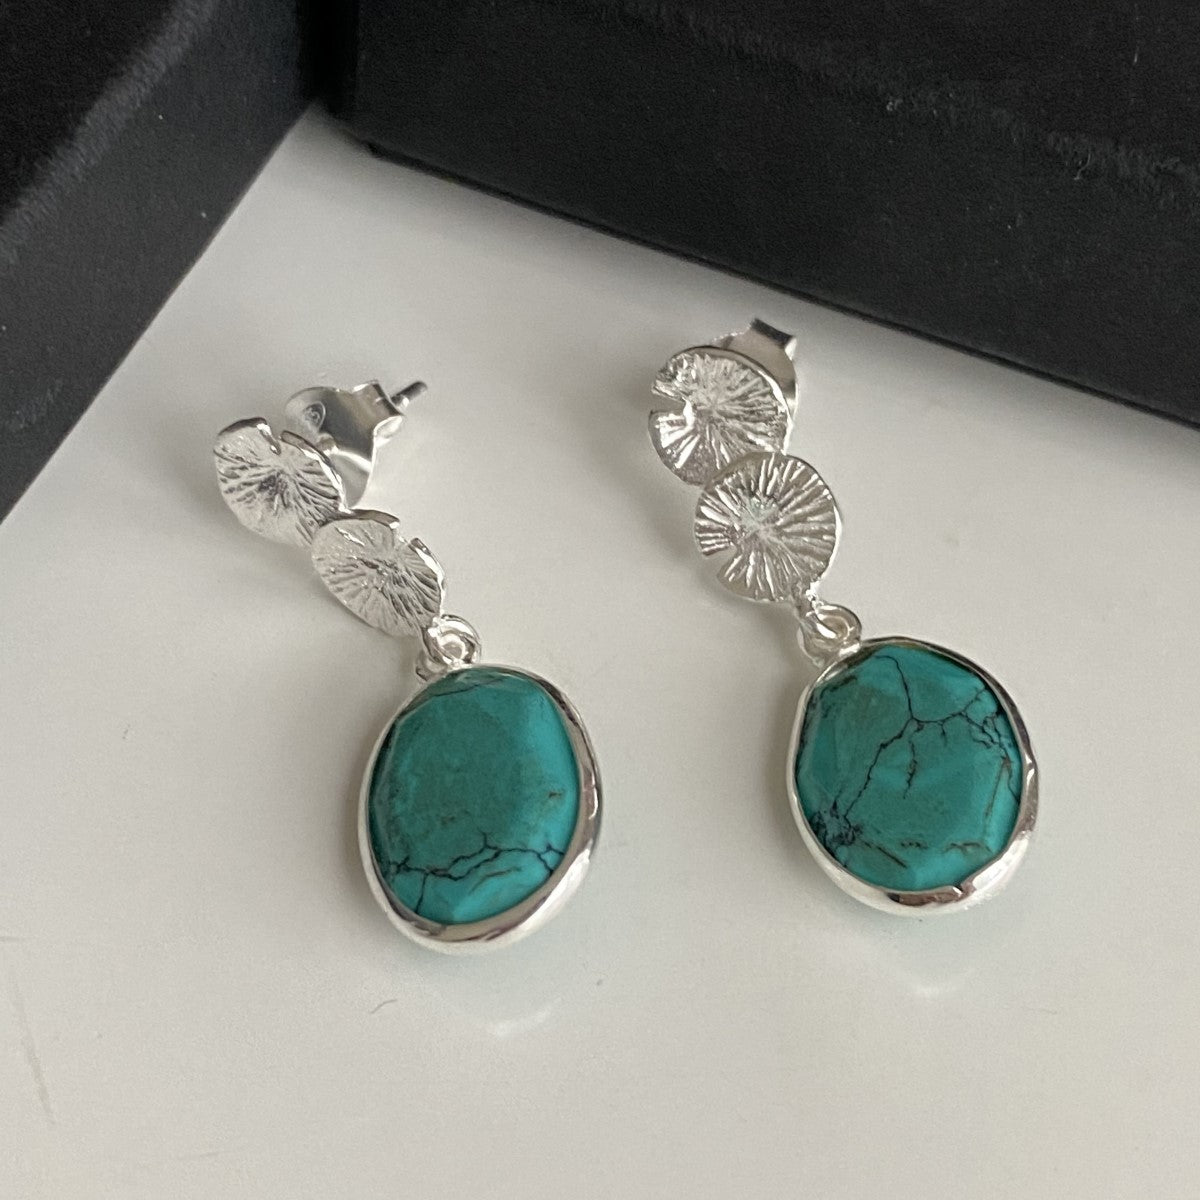 Lily Pad Earrings in Sterling Silver with a Turquoise Gemstone Drop